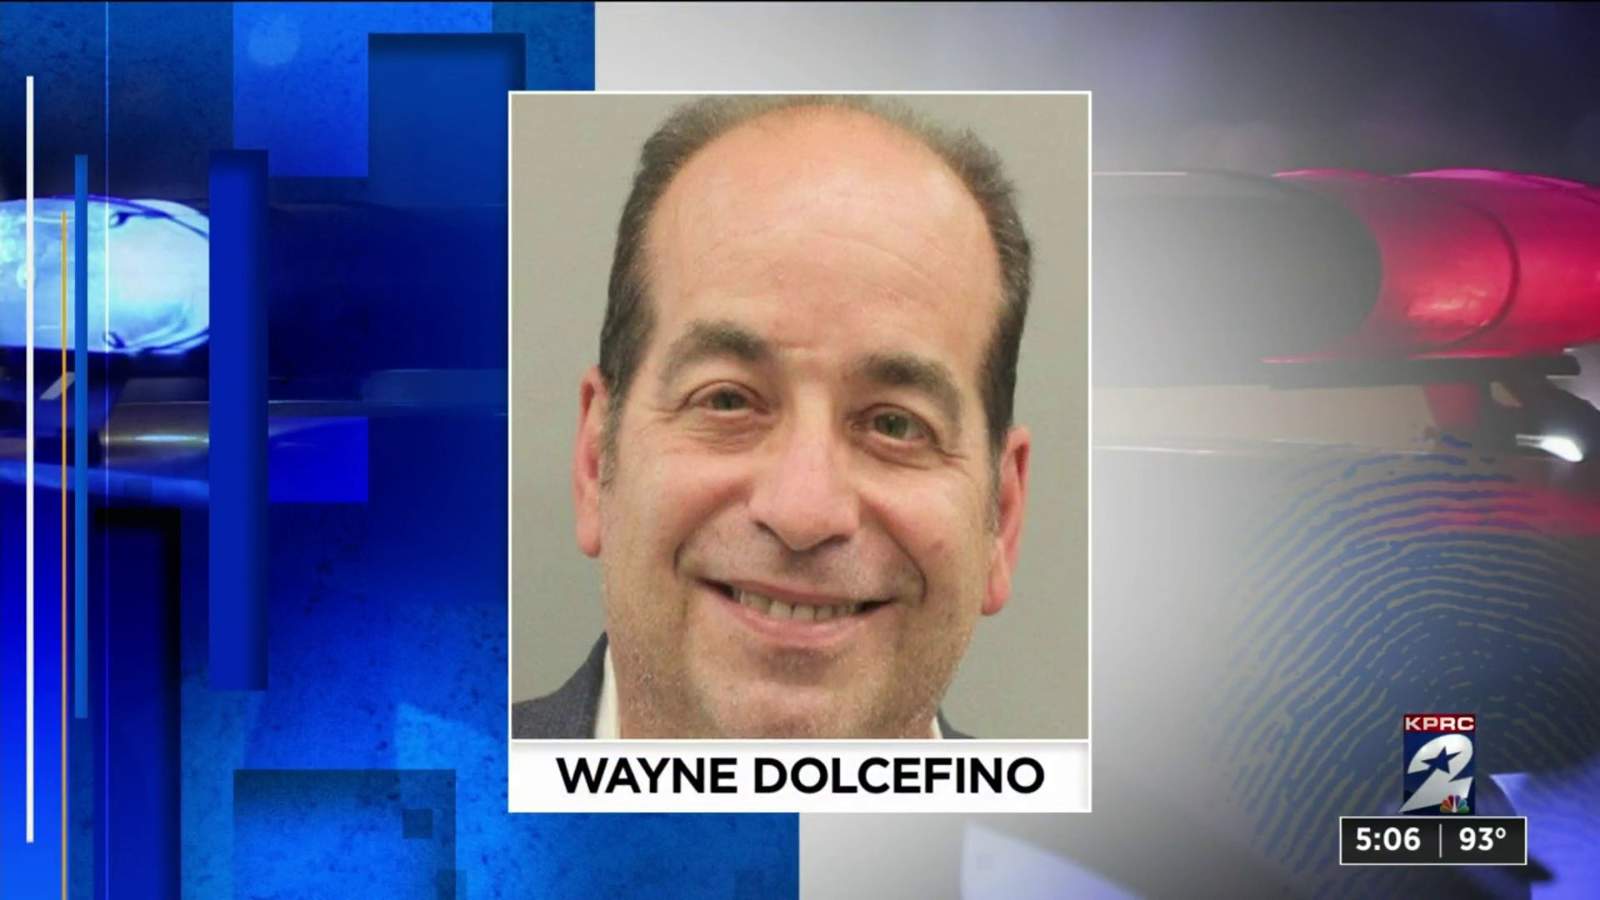 Investigative journalist Wayne Dolcefino held in contempt of court by Harris County judge